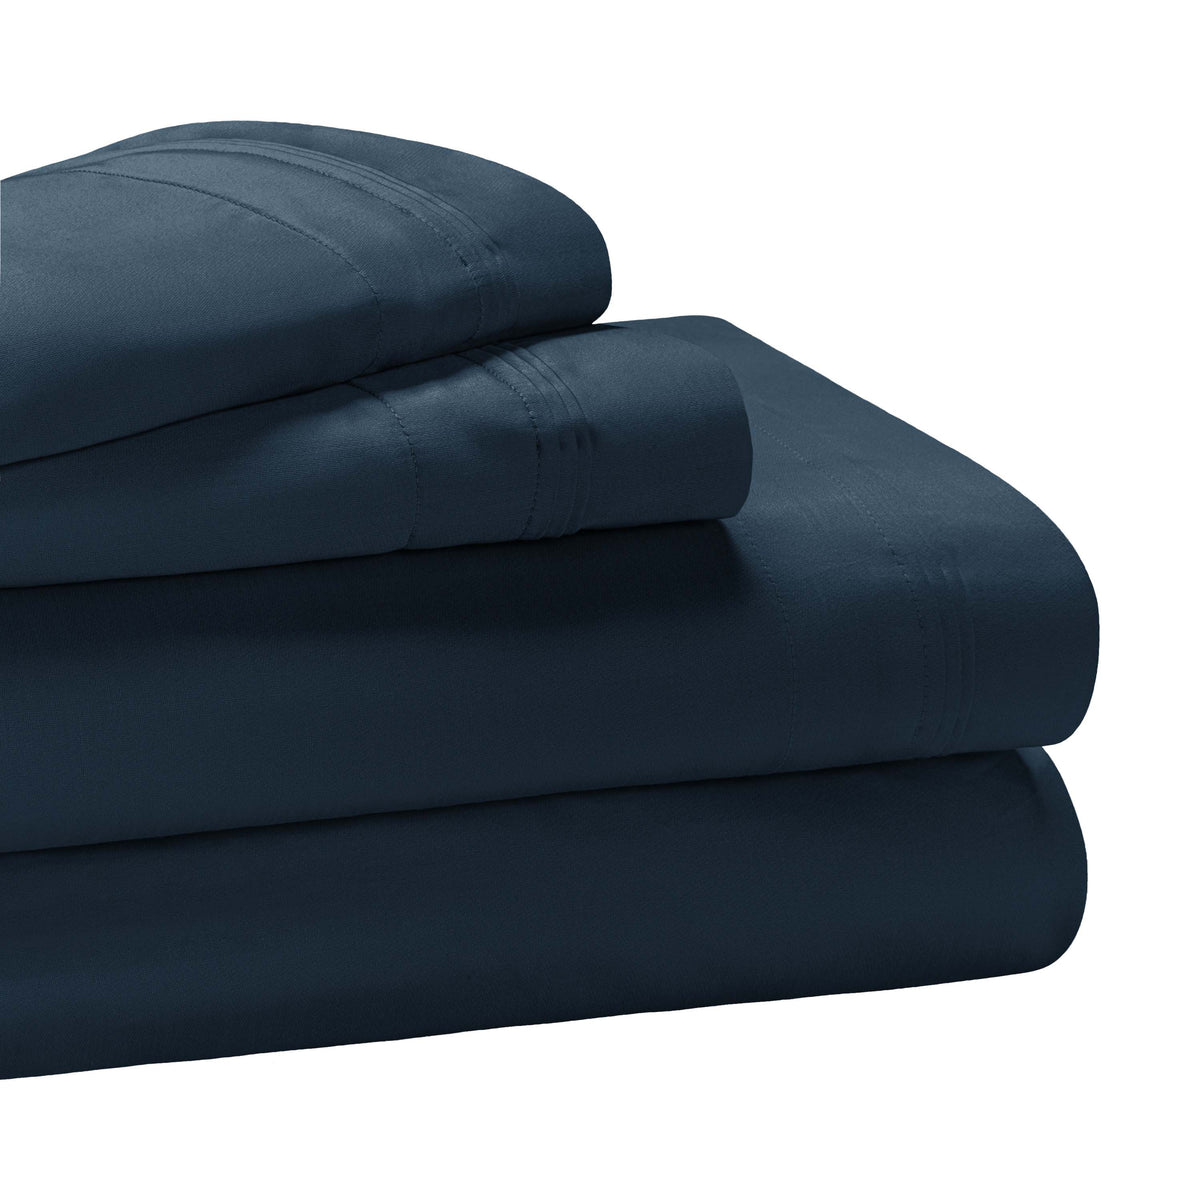 Egyptian Cotton 1000 Thread Count Eco-Friendly Solid Sheet Set - NavyBlue